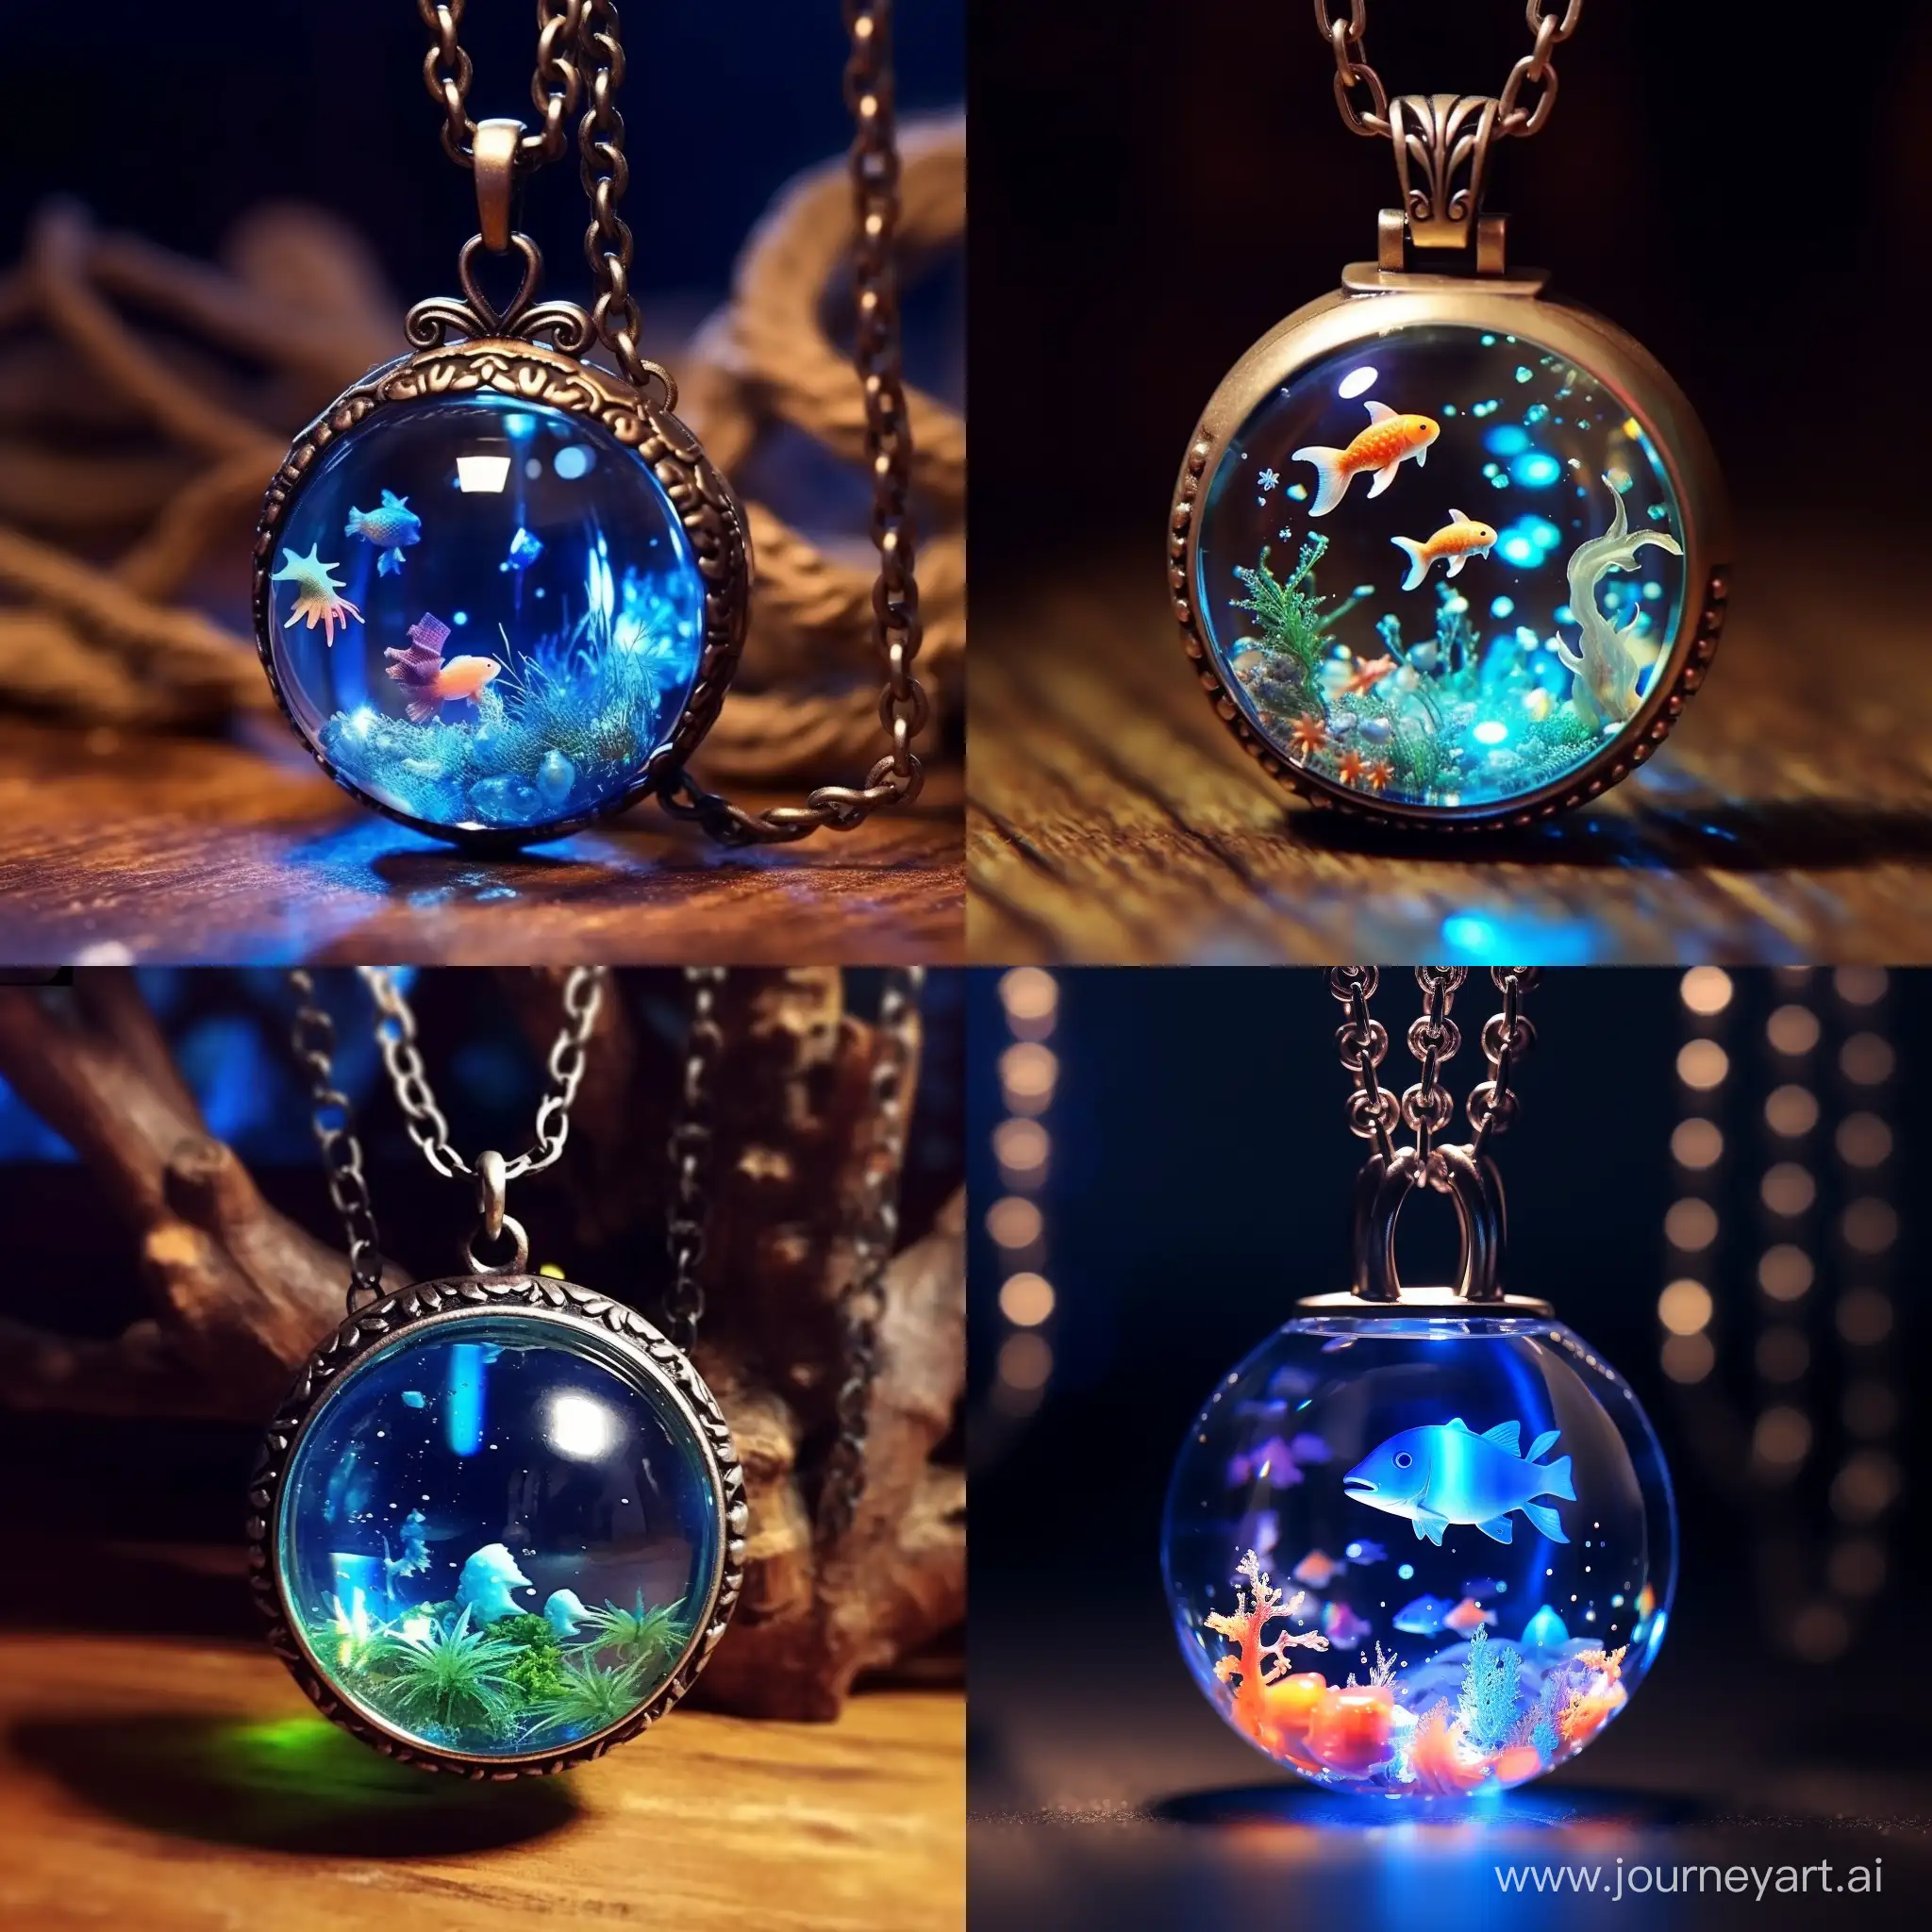 tiny sea creatures swimming in a glass bubble-shaped pendant, necklace, blue, glowy light, in cartoon style